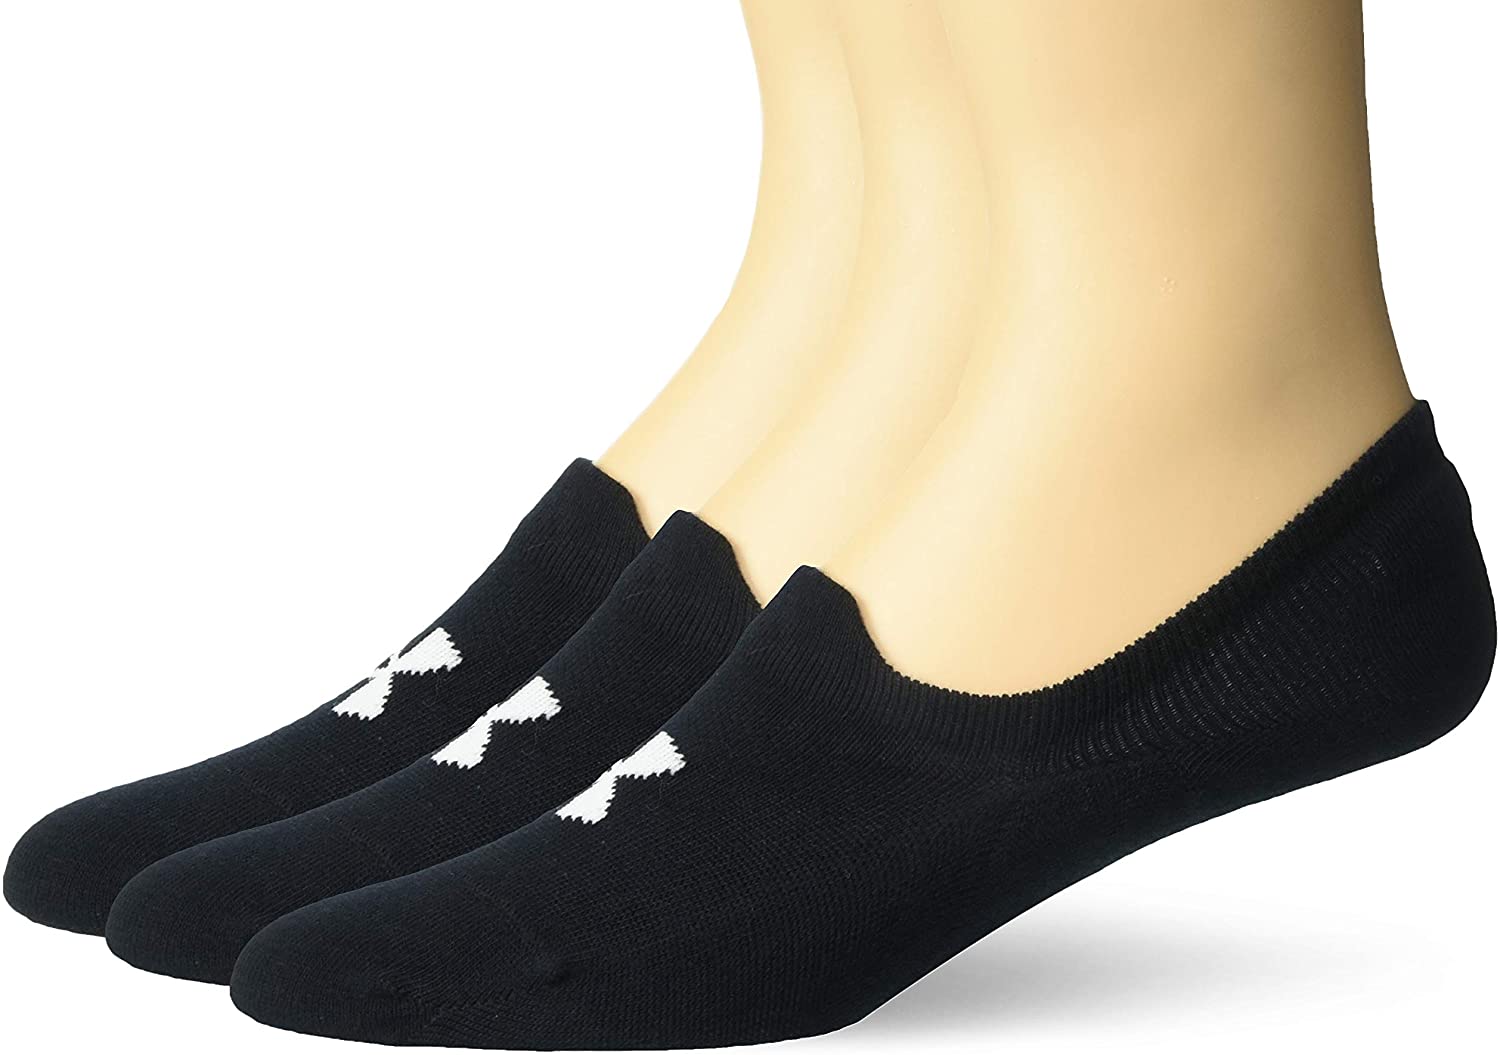 3-Pairs Under Armour Adult Essential Ultra Low Tab Socks (Black, Medium or Large) $10.50 + Free S&H w/ Prime or $25+